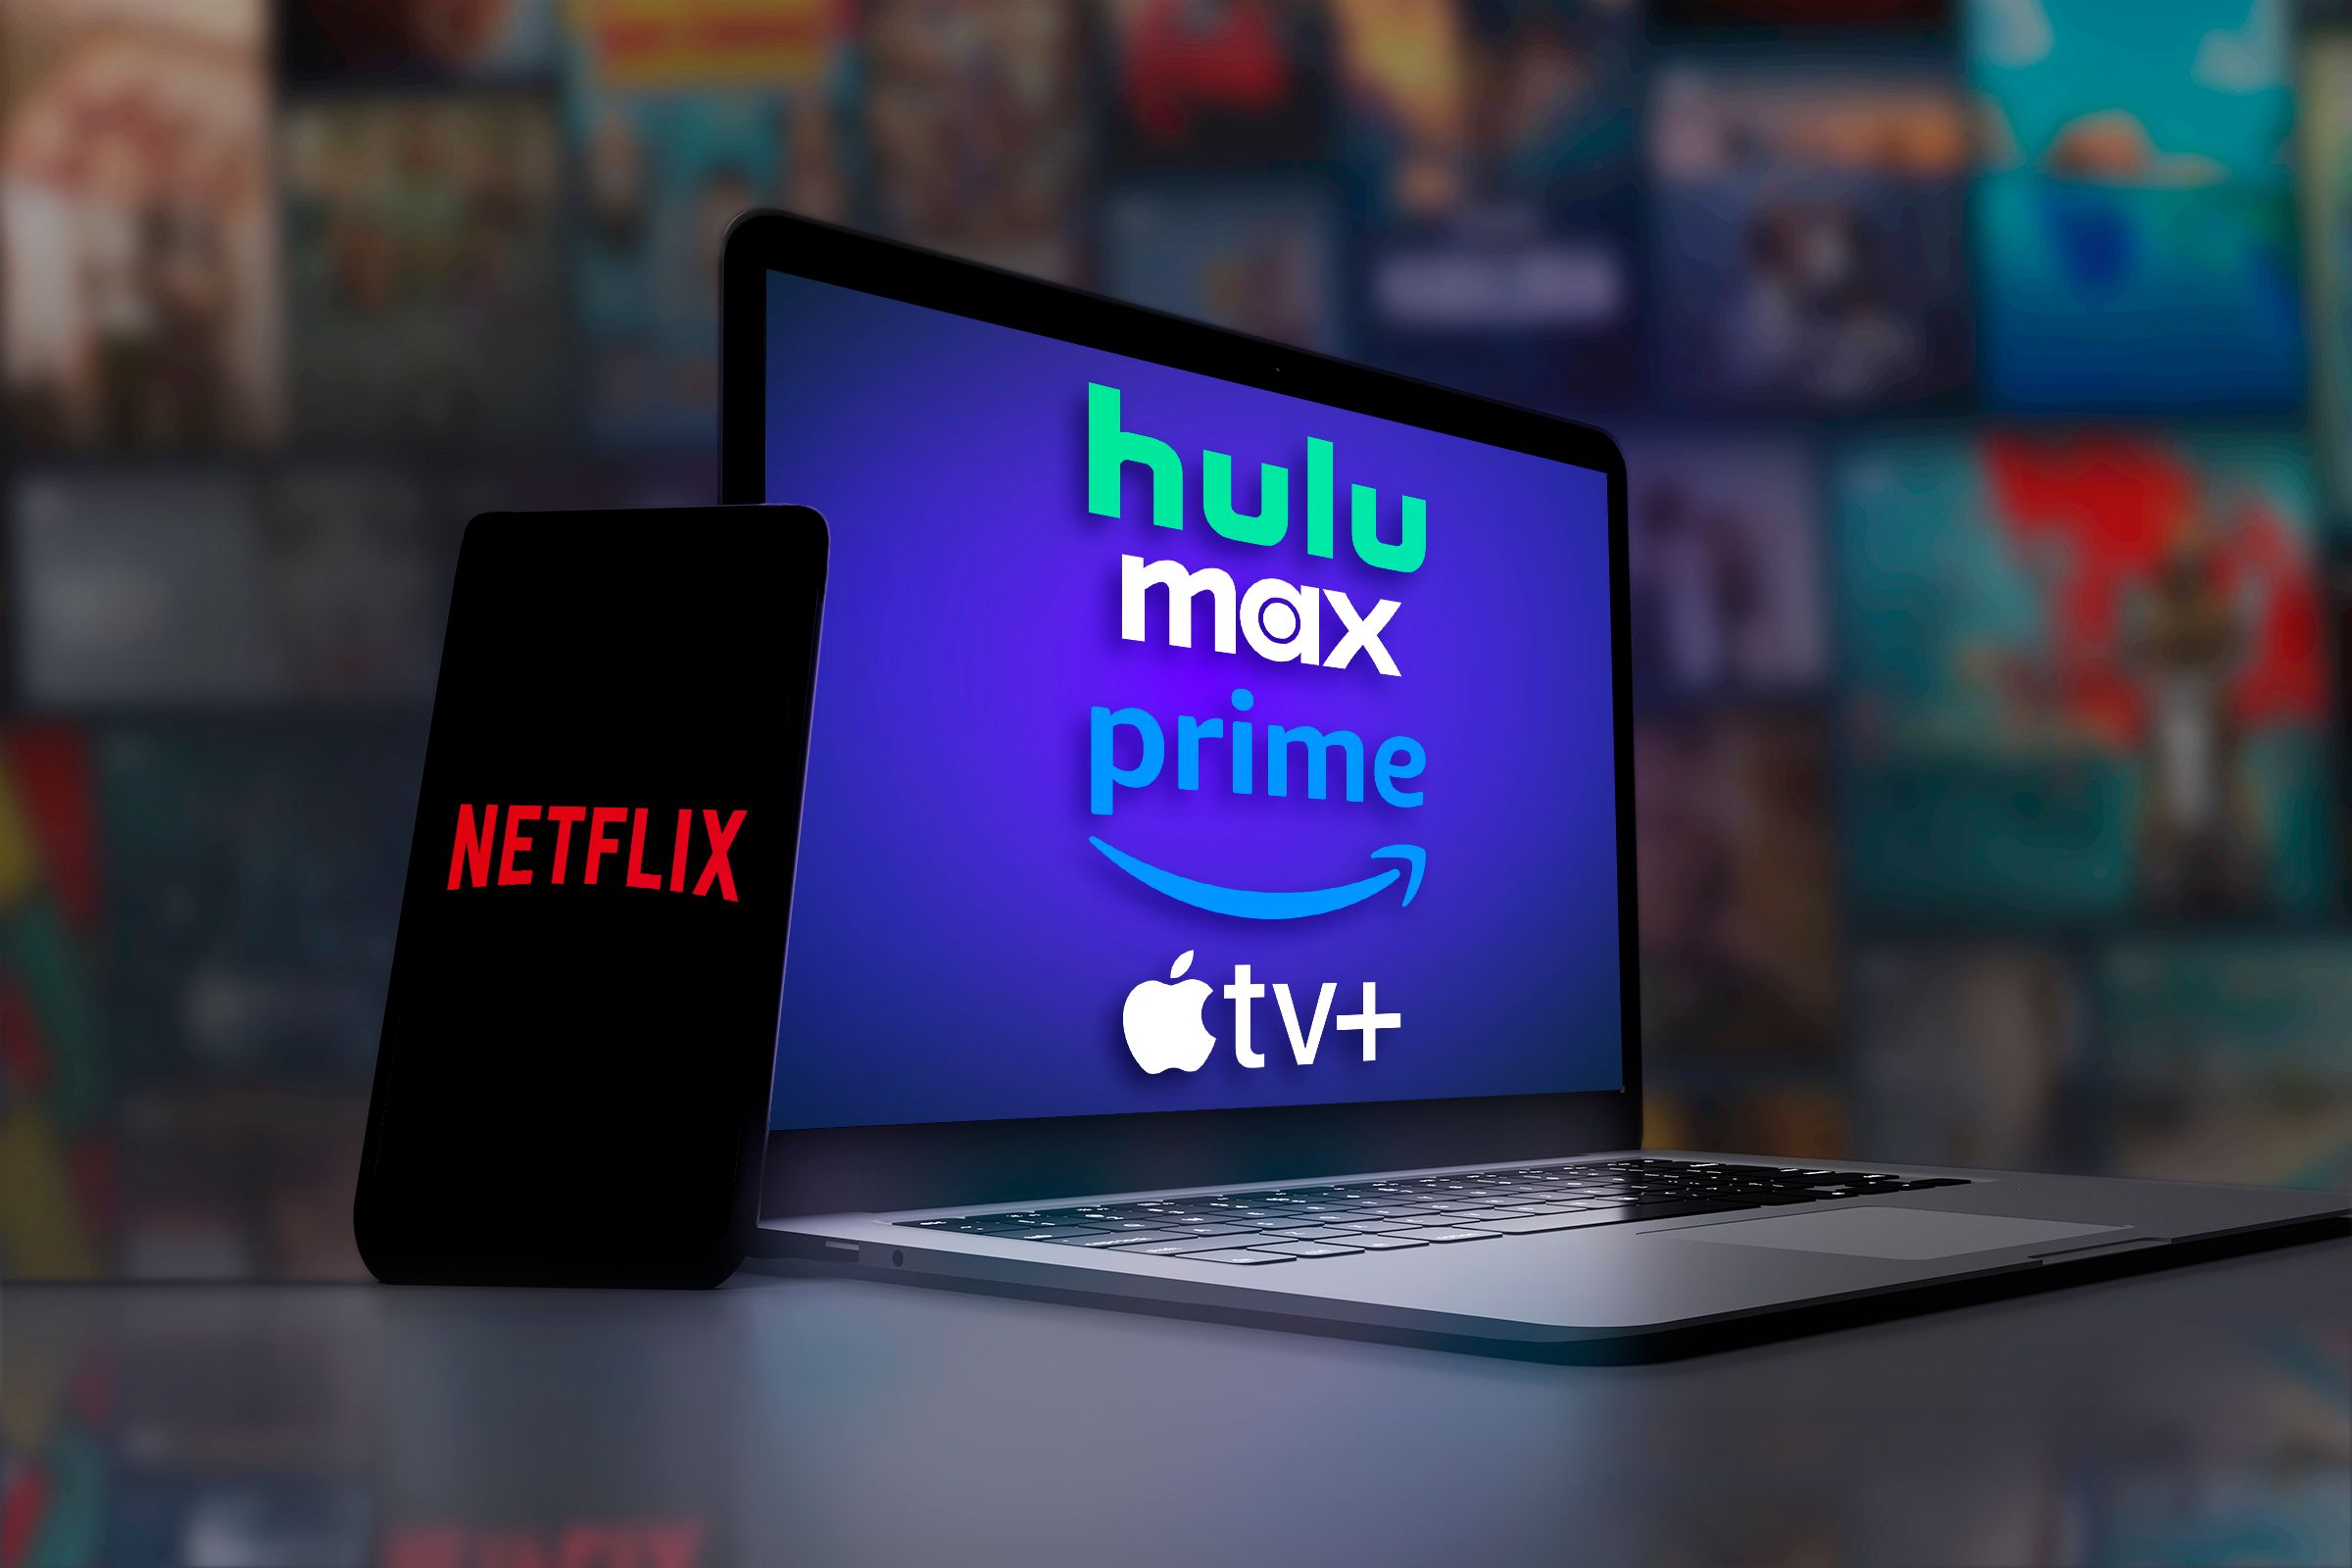 A phone with the Netflix logo and a laptop with the logos of Hulu, Max, Amazon Prime, and Apple TV Plus.